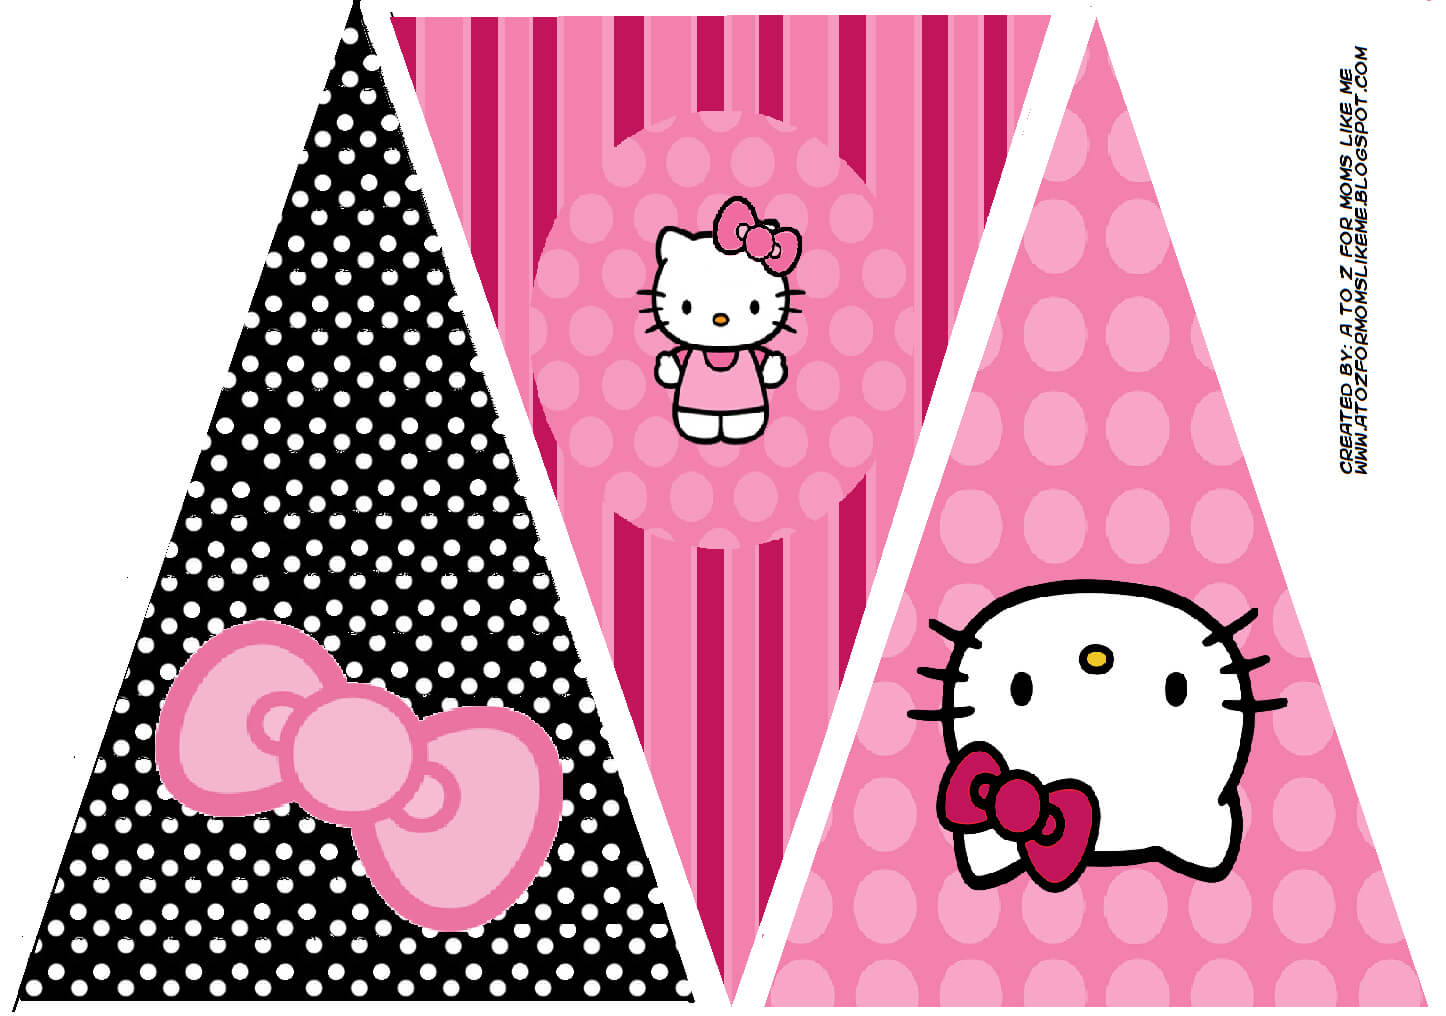 hello-kitty-party-free-party-printables-images-and-papers-oh-my